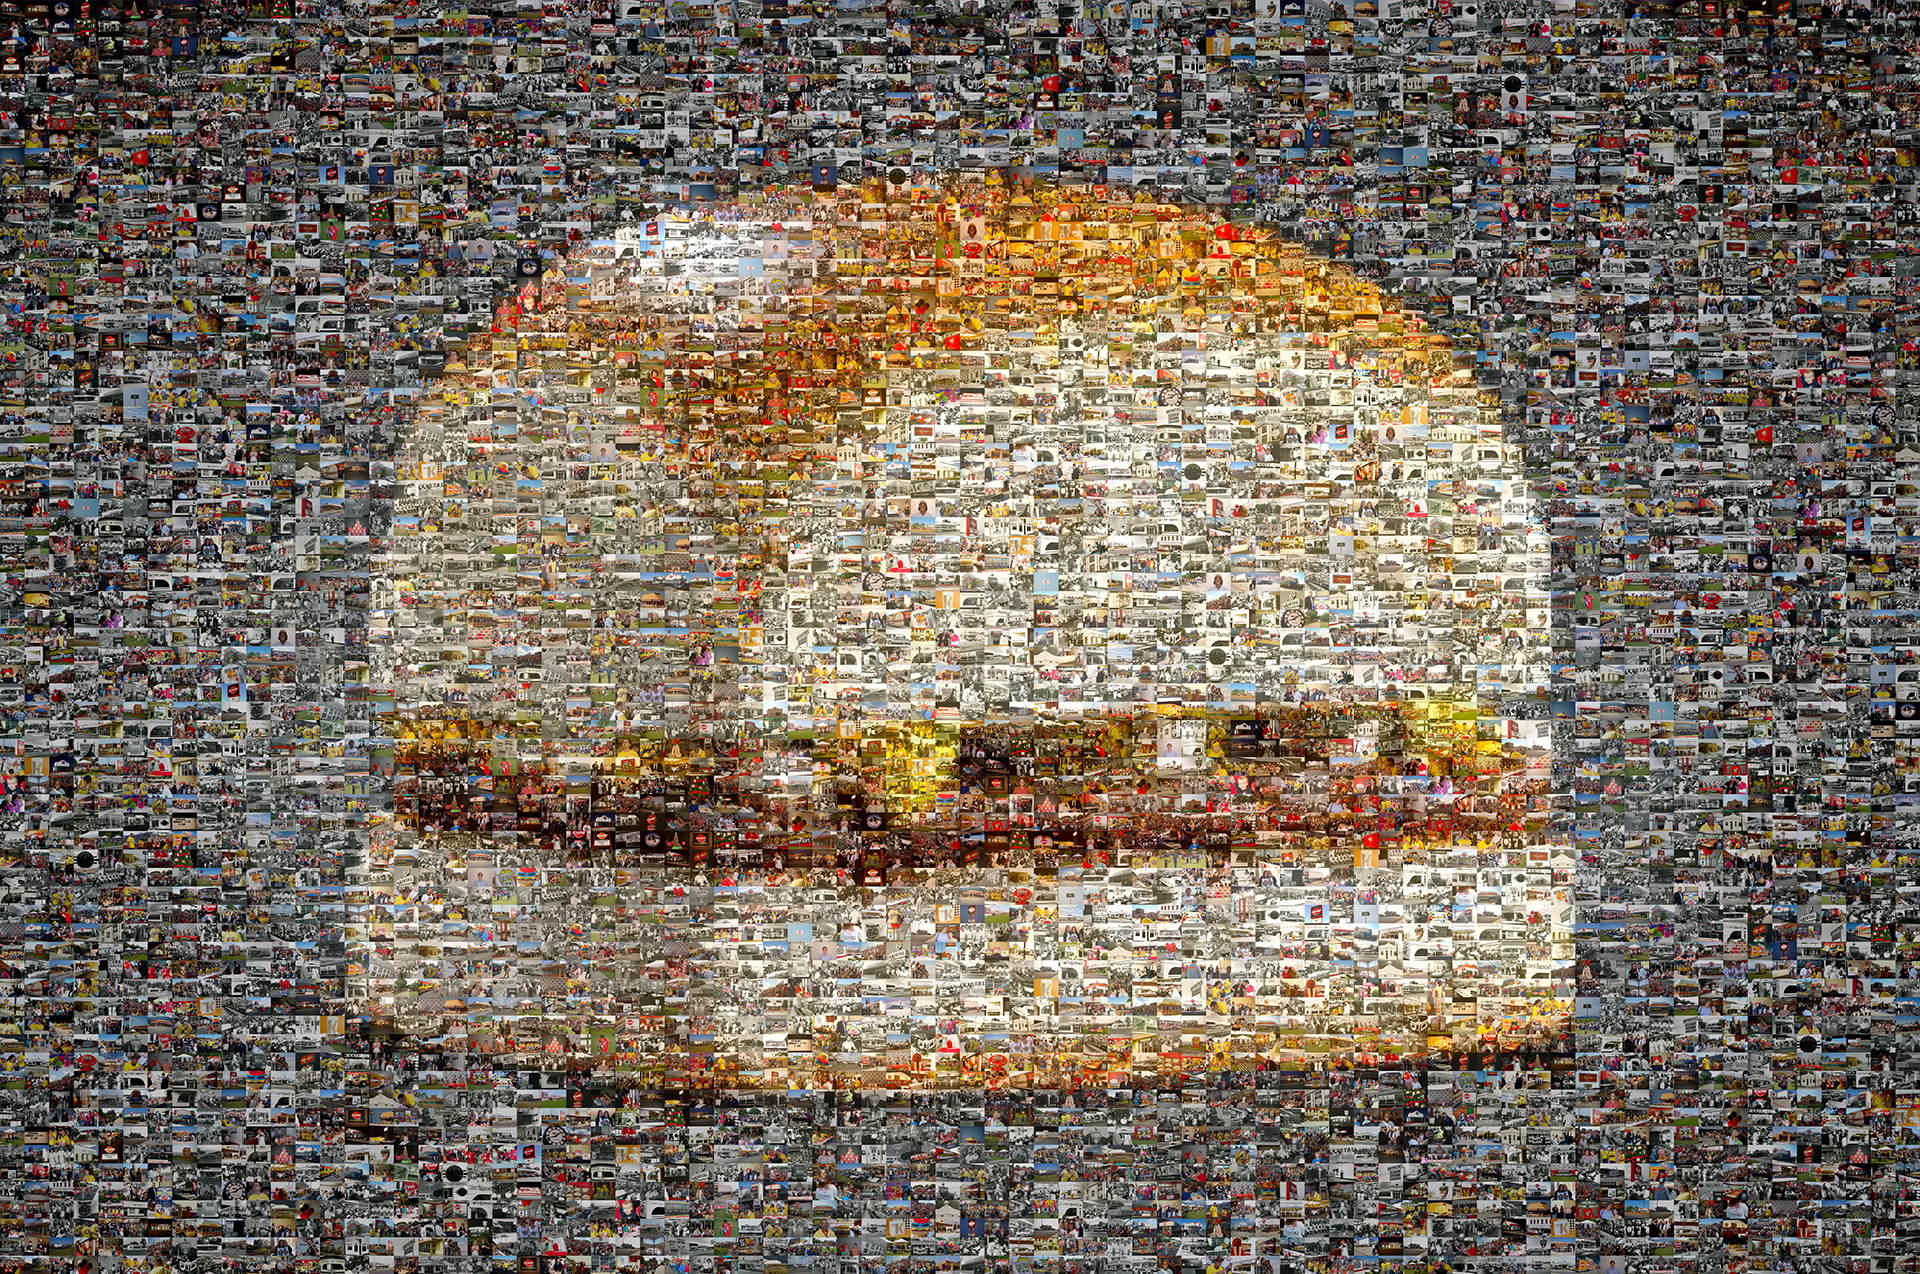 photo mosaic to celebrate 80 years of business, this mosaic was created using 745 photos